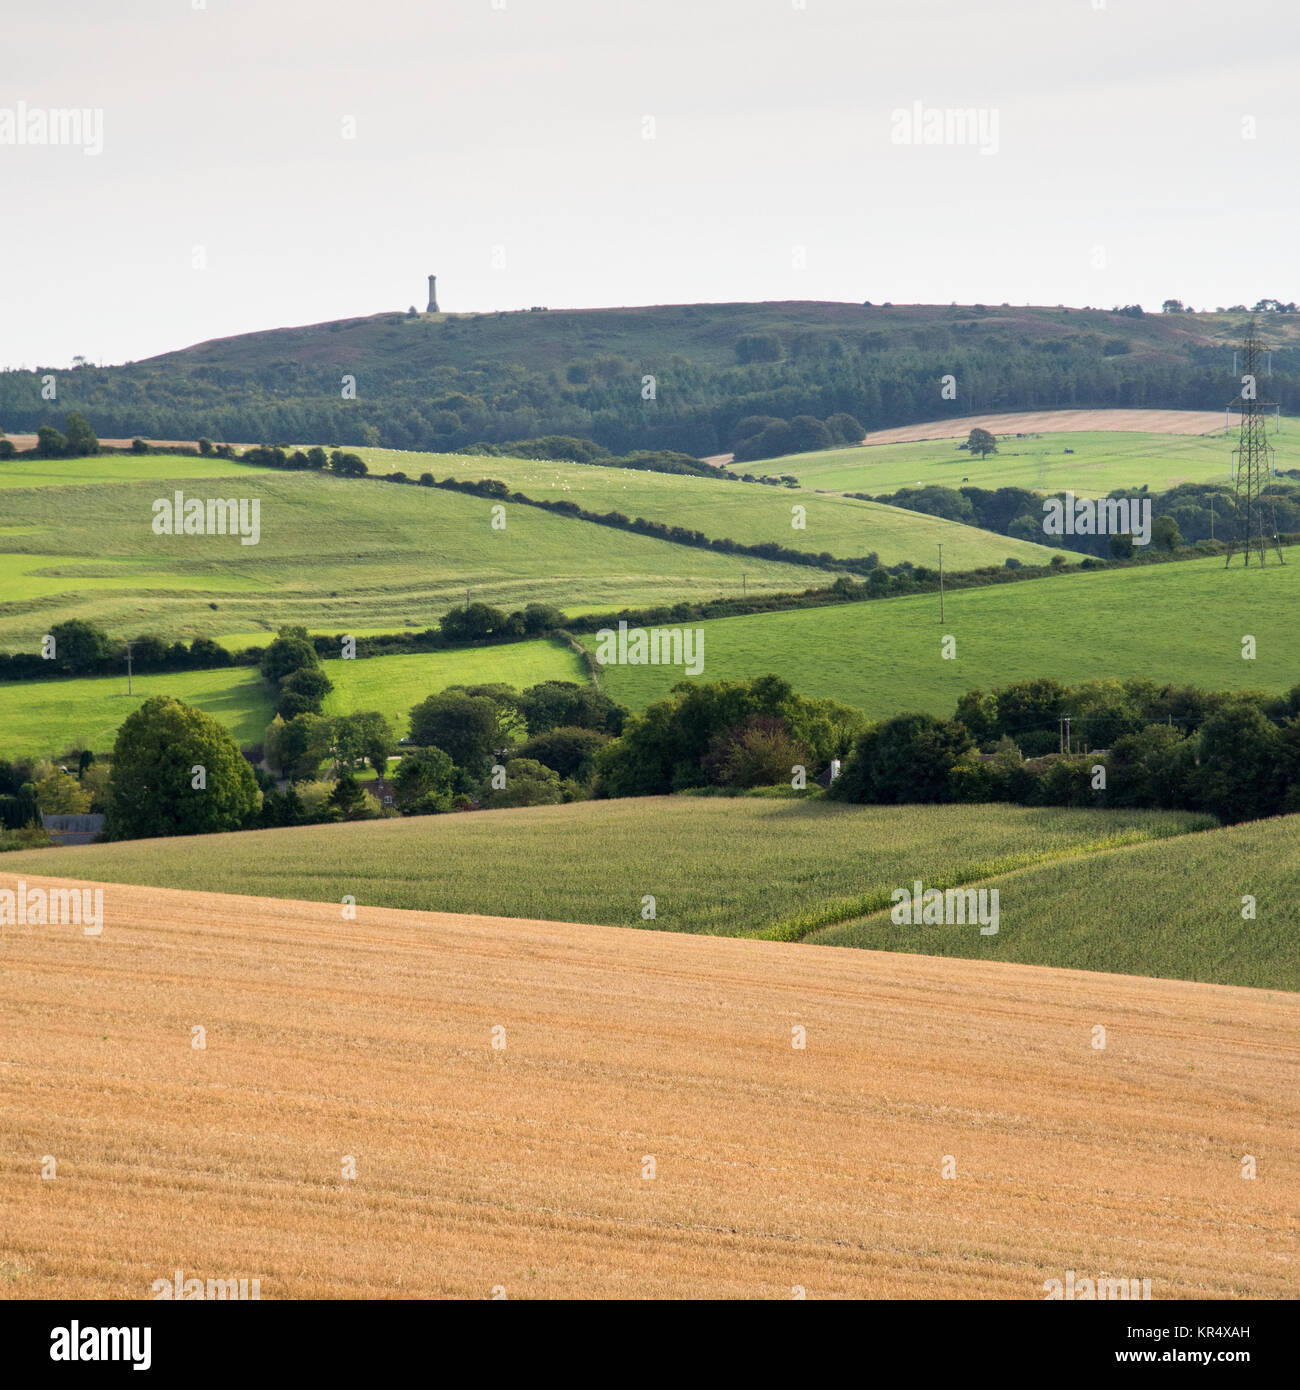 The monument to Captain Thomas Mastermain Hardy stands in woodland on Black Down above fields of pasture and crops in the the Winterbourne Abbas valle Stock Photo